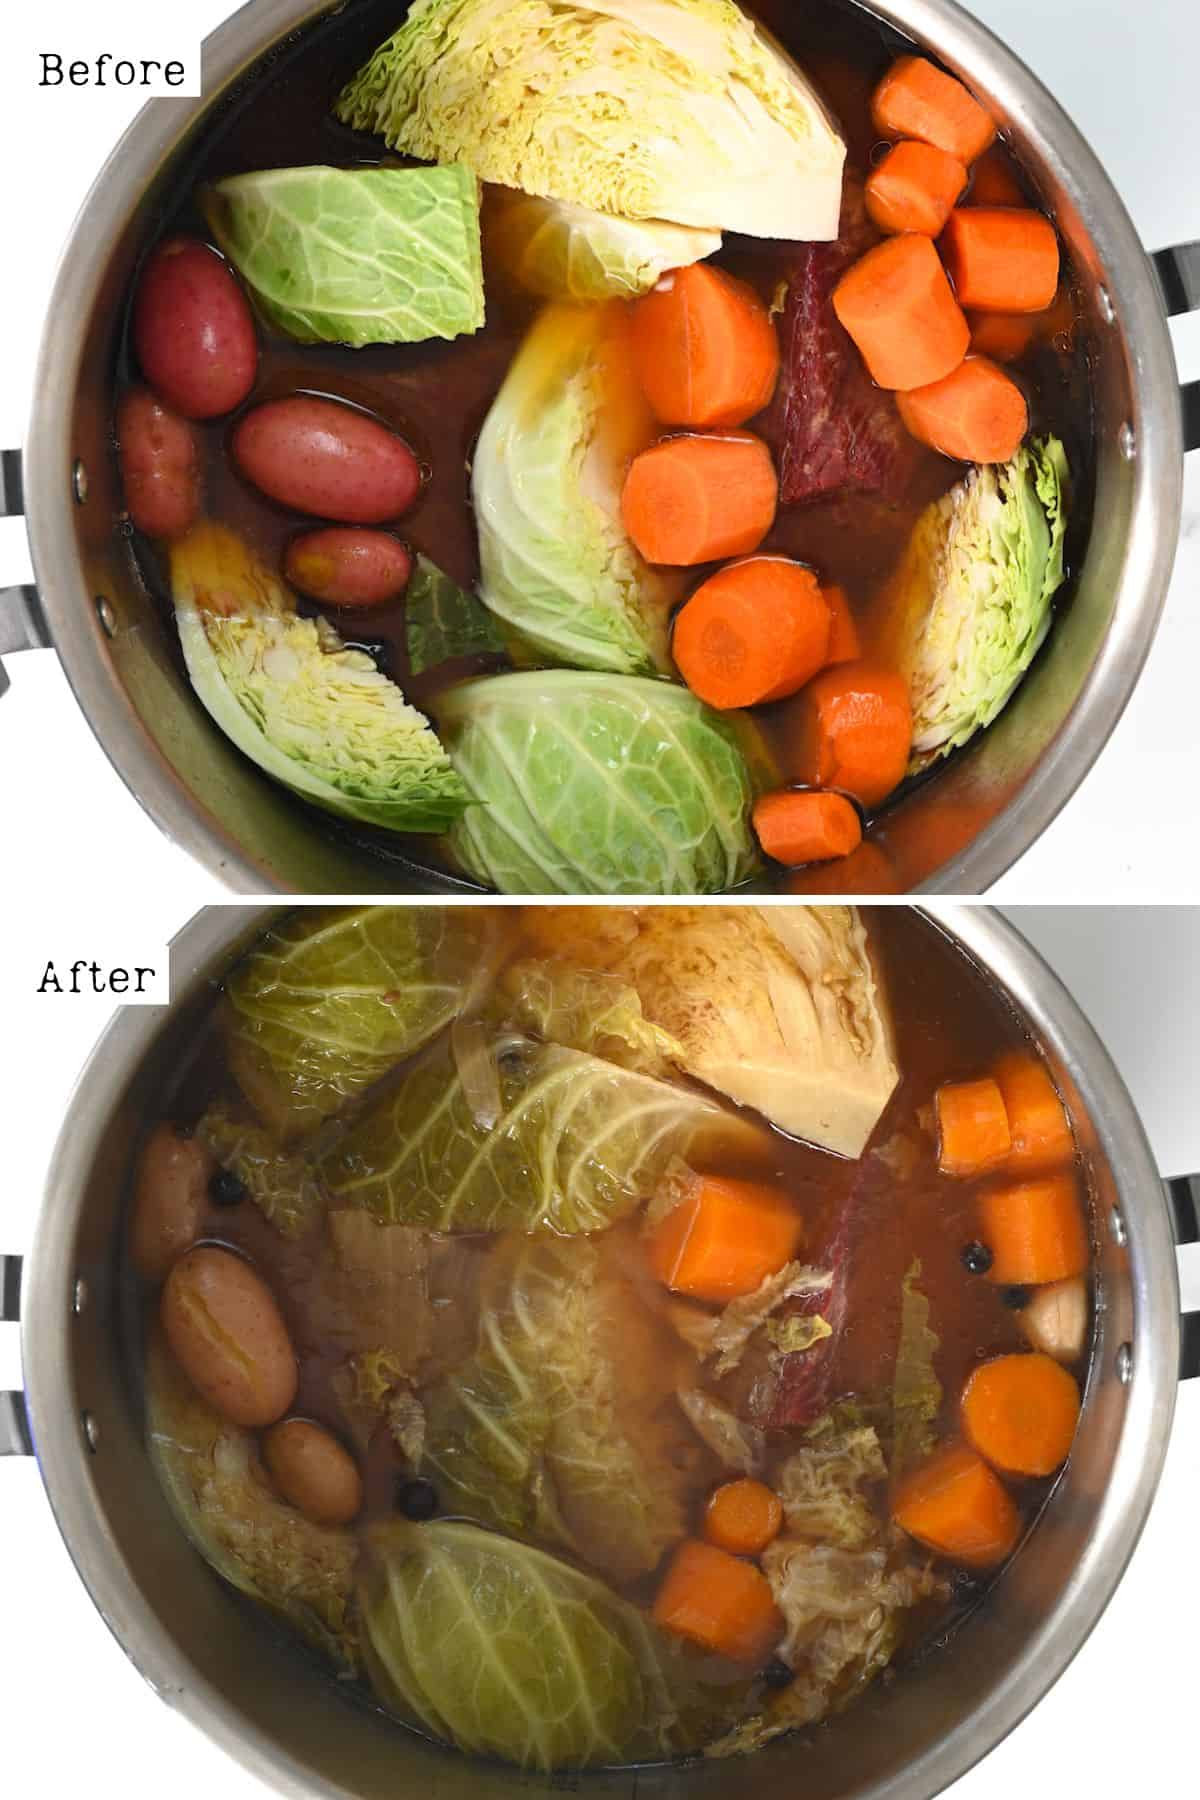 Before and after pressure cooking corned beef and cabbage